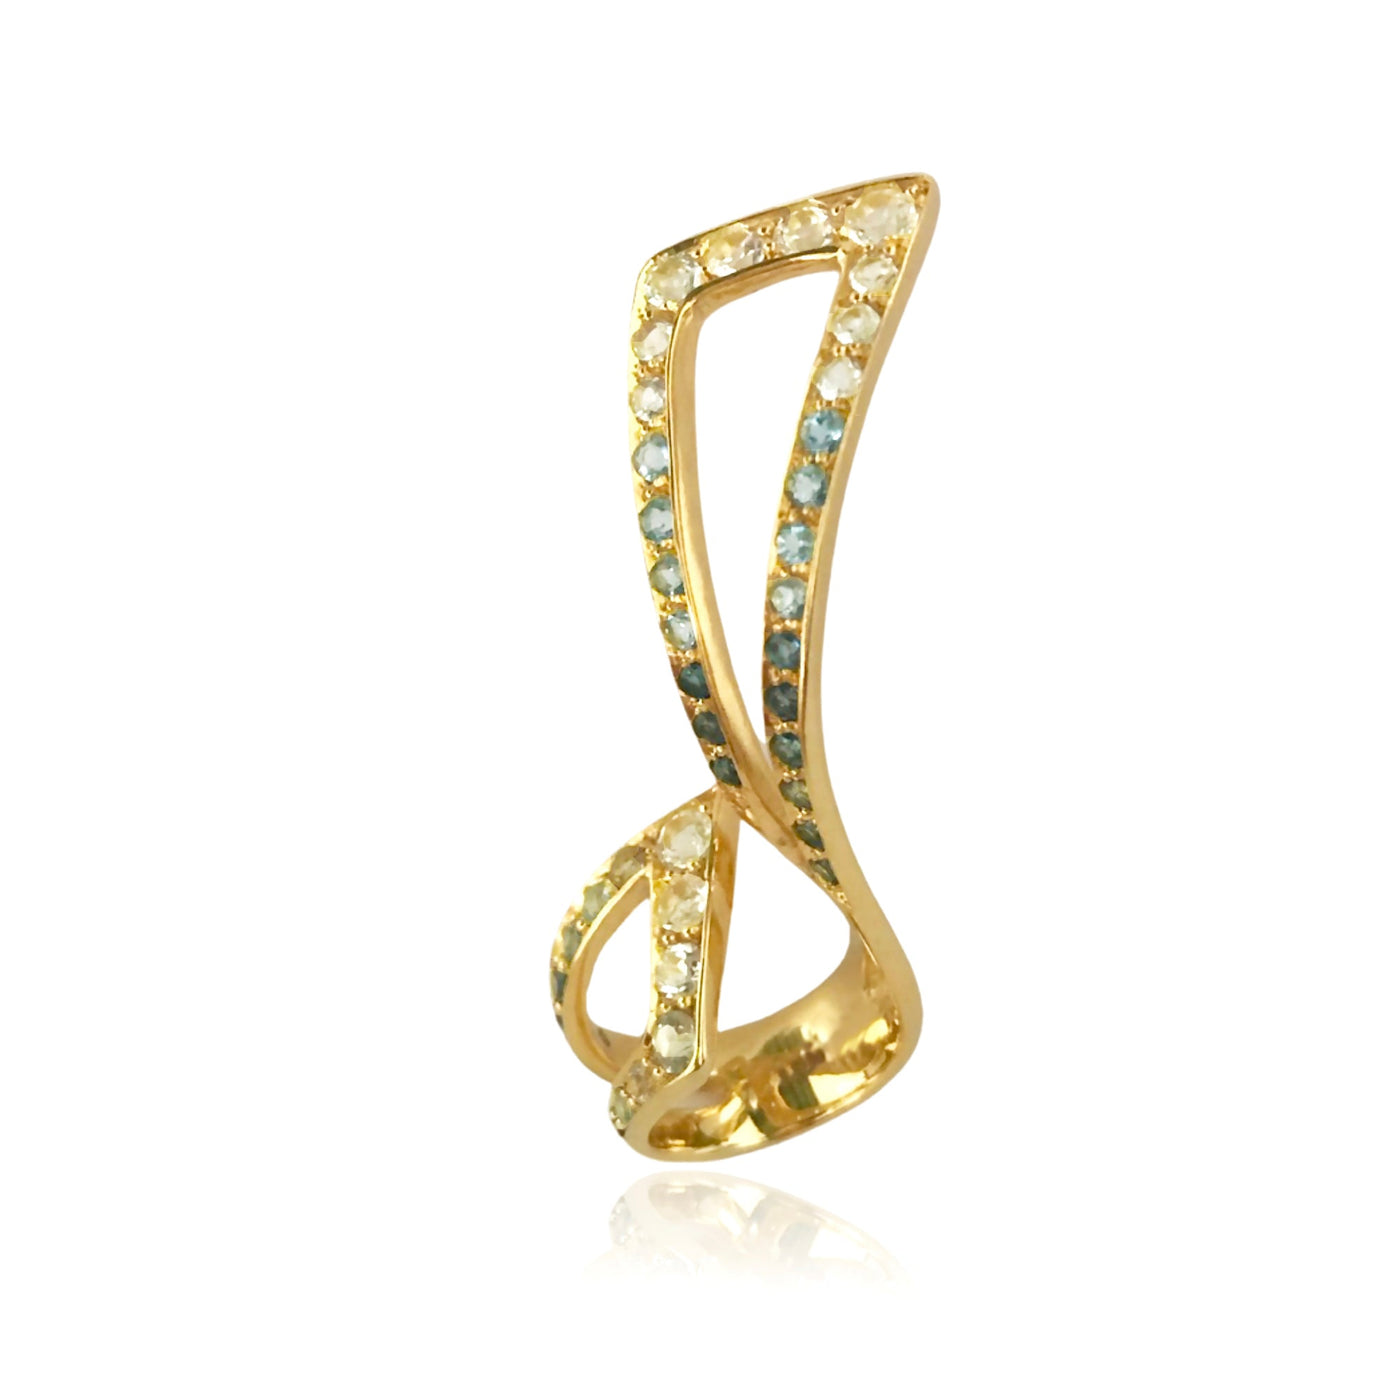 Gold sculptural cocktail ring with blue and white topaz from Atelier ORMAN